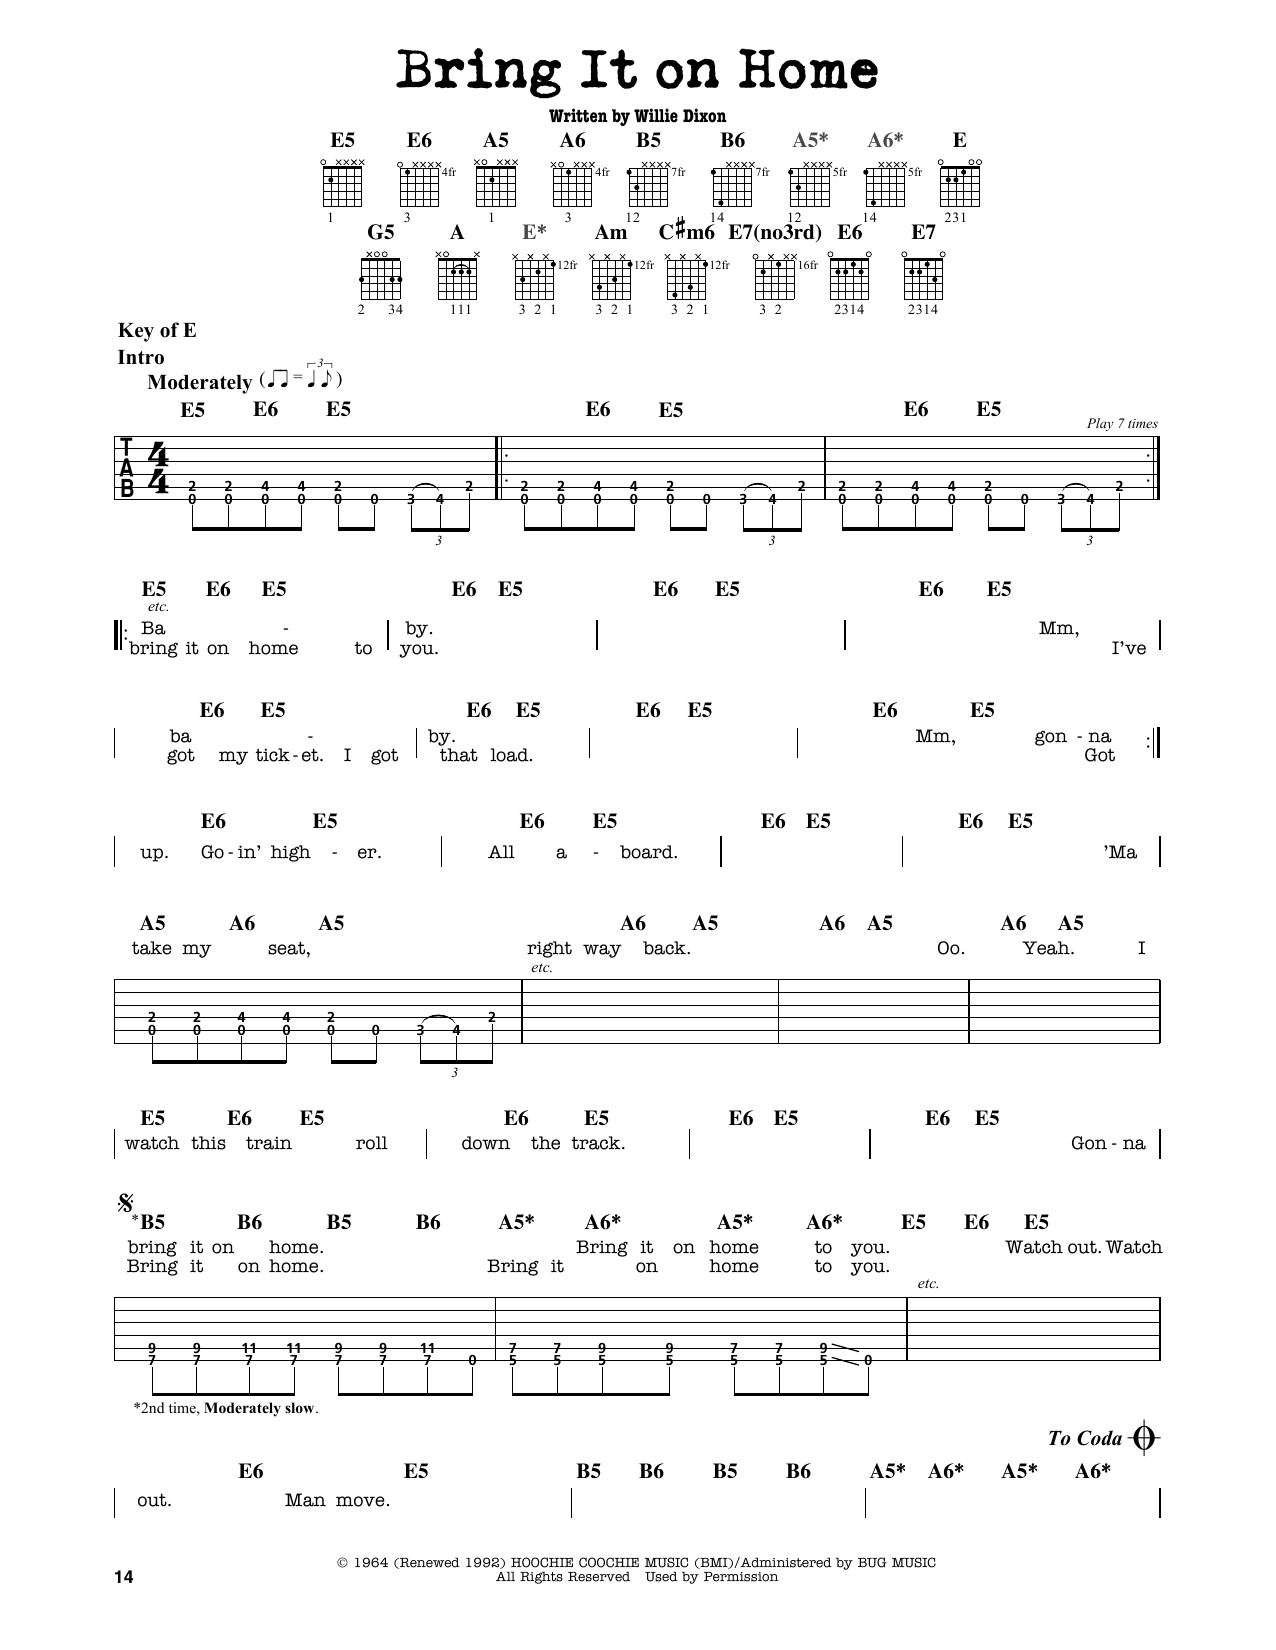 Download Sonny Boy Williamson Bring It On Home Sheet Music